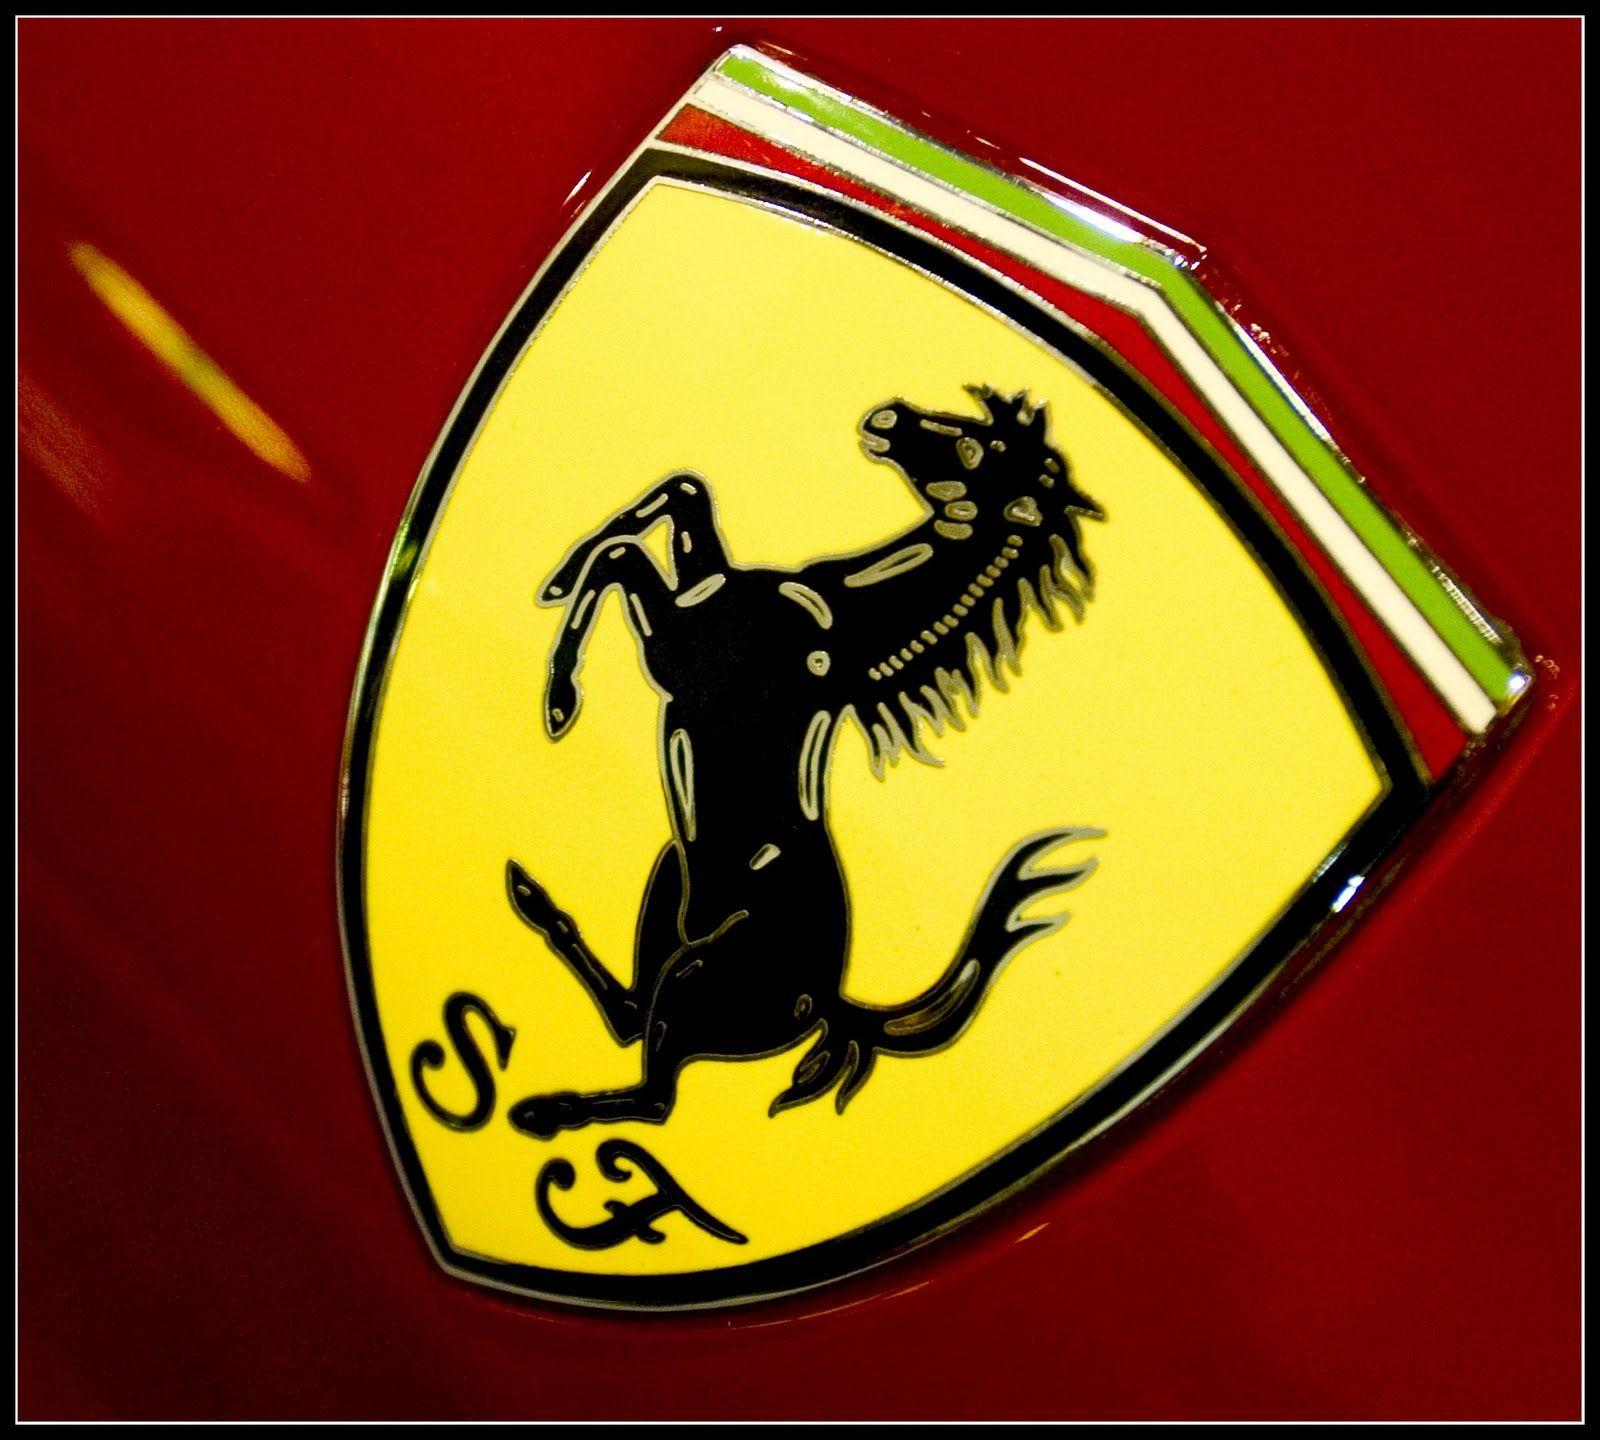 SF Horse Logo - About Ferrari - The Prancing Horse | The Best Logo In The World